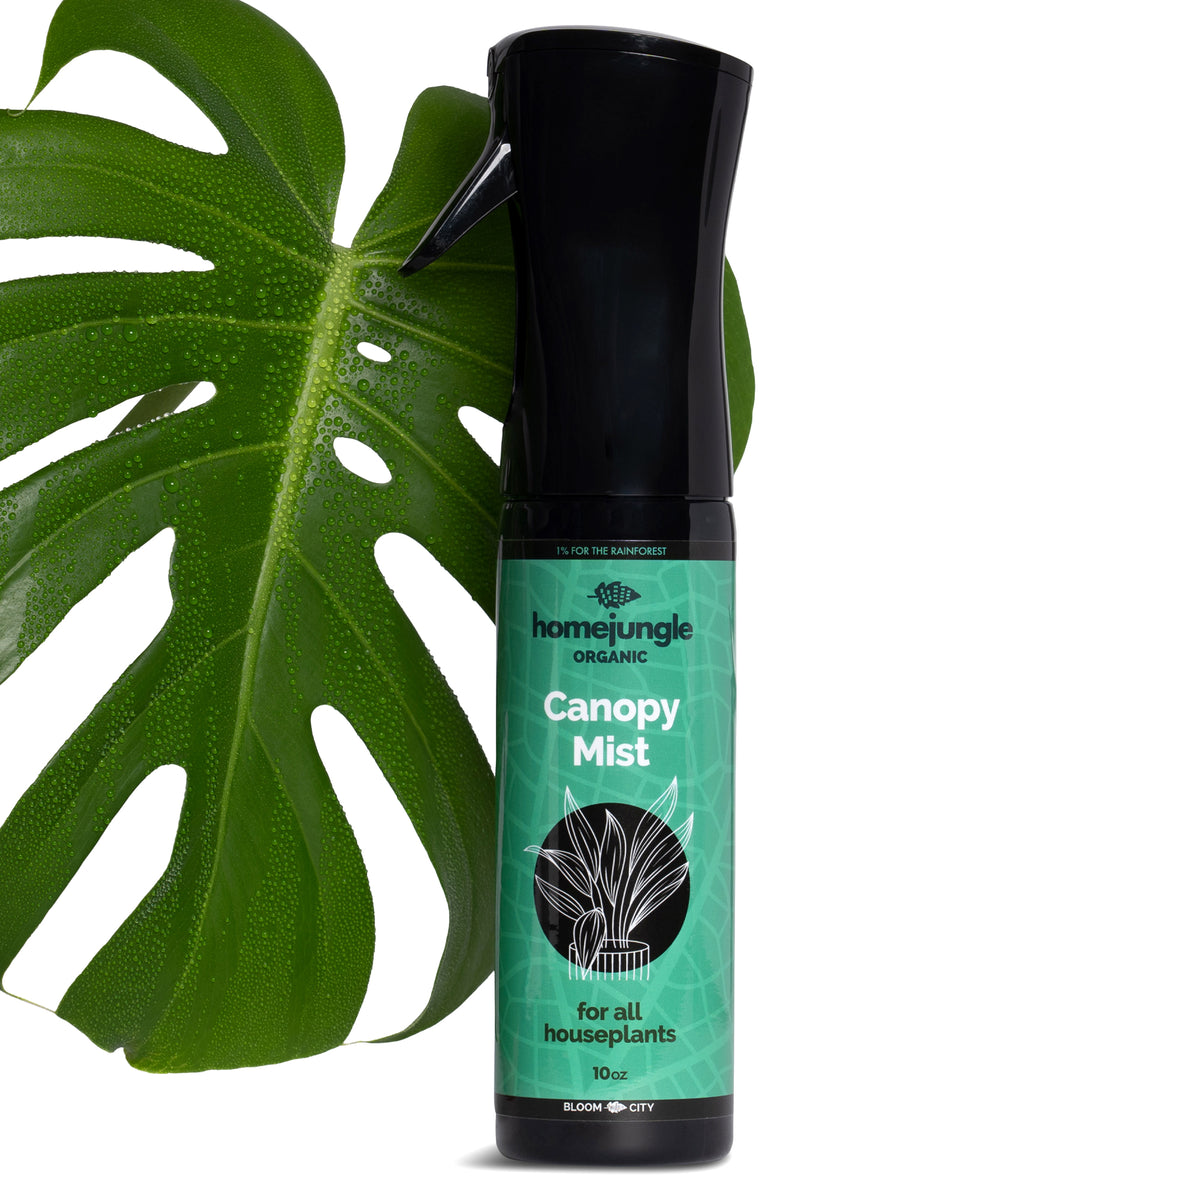 Canopy Mist&lt;br&gt;for all houseplants